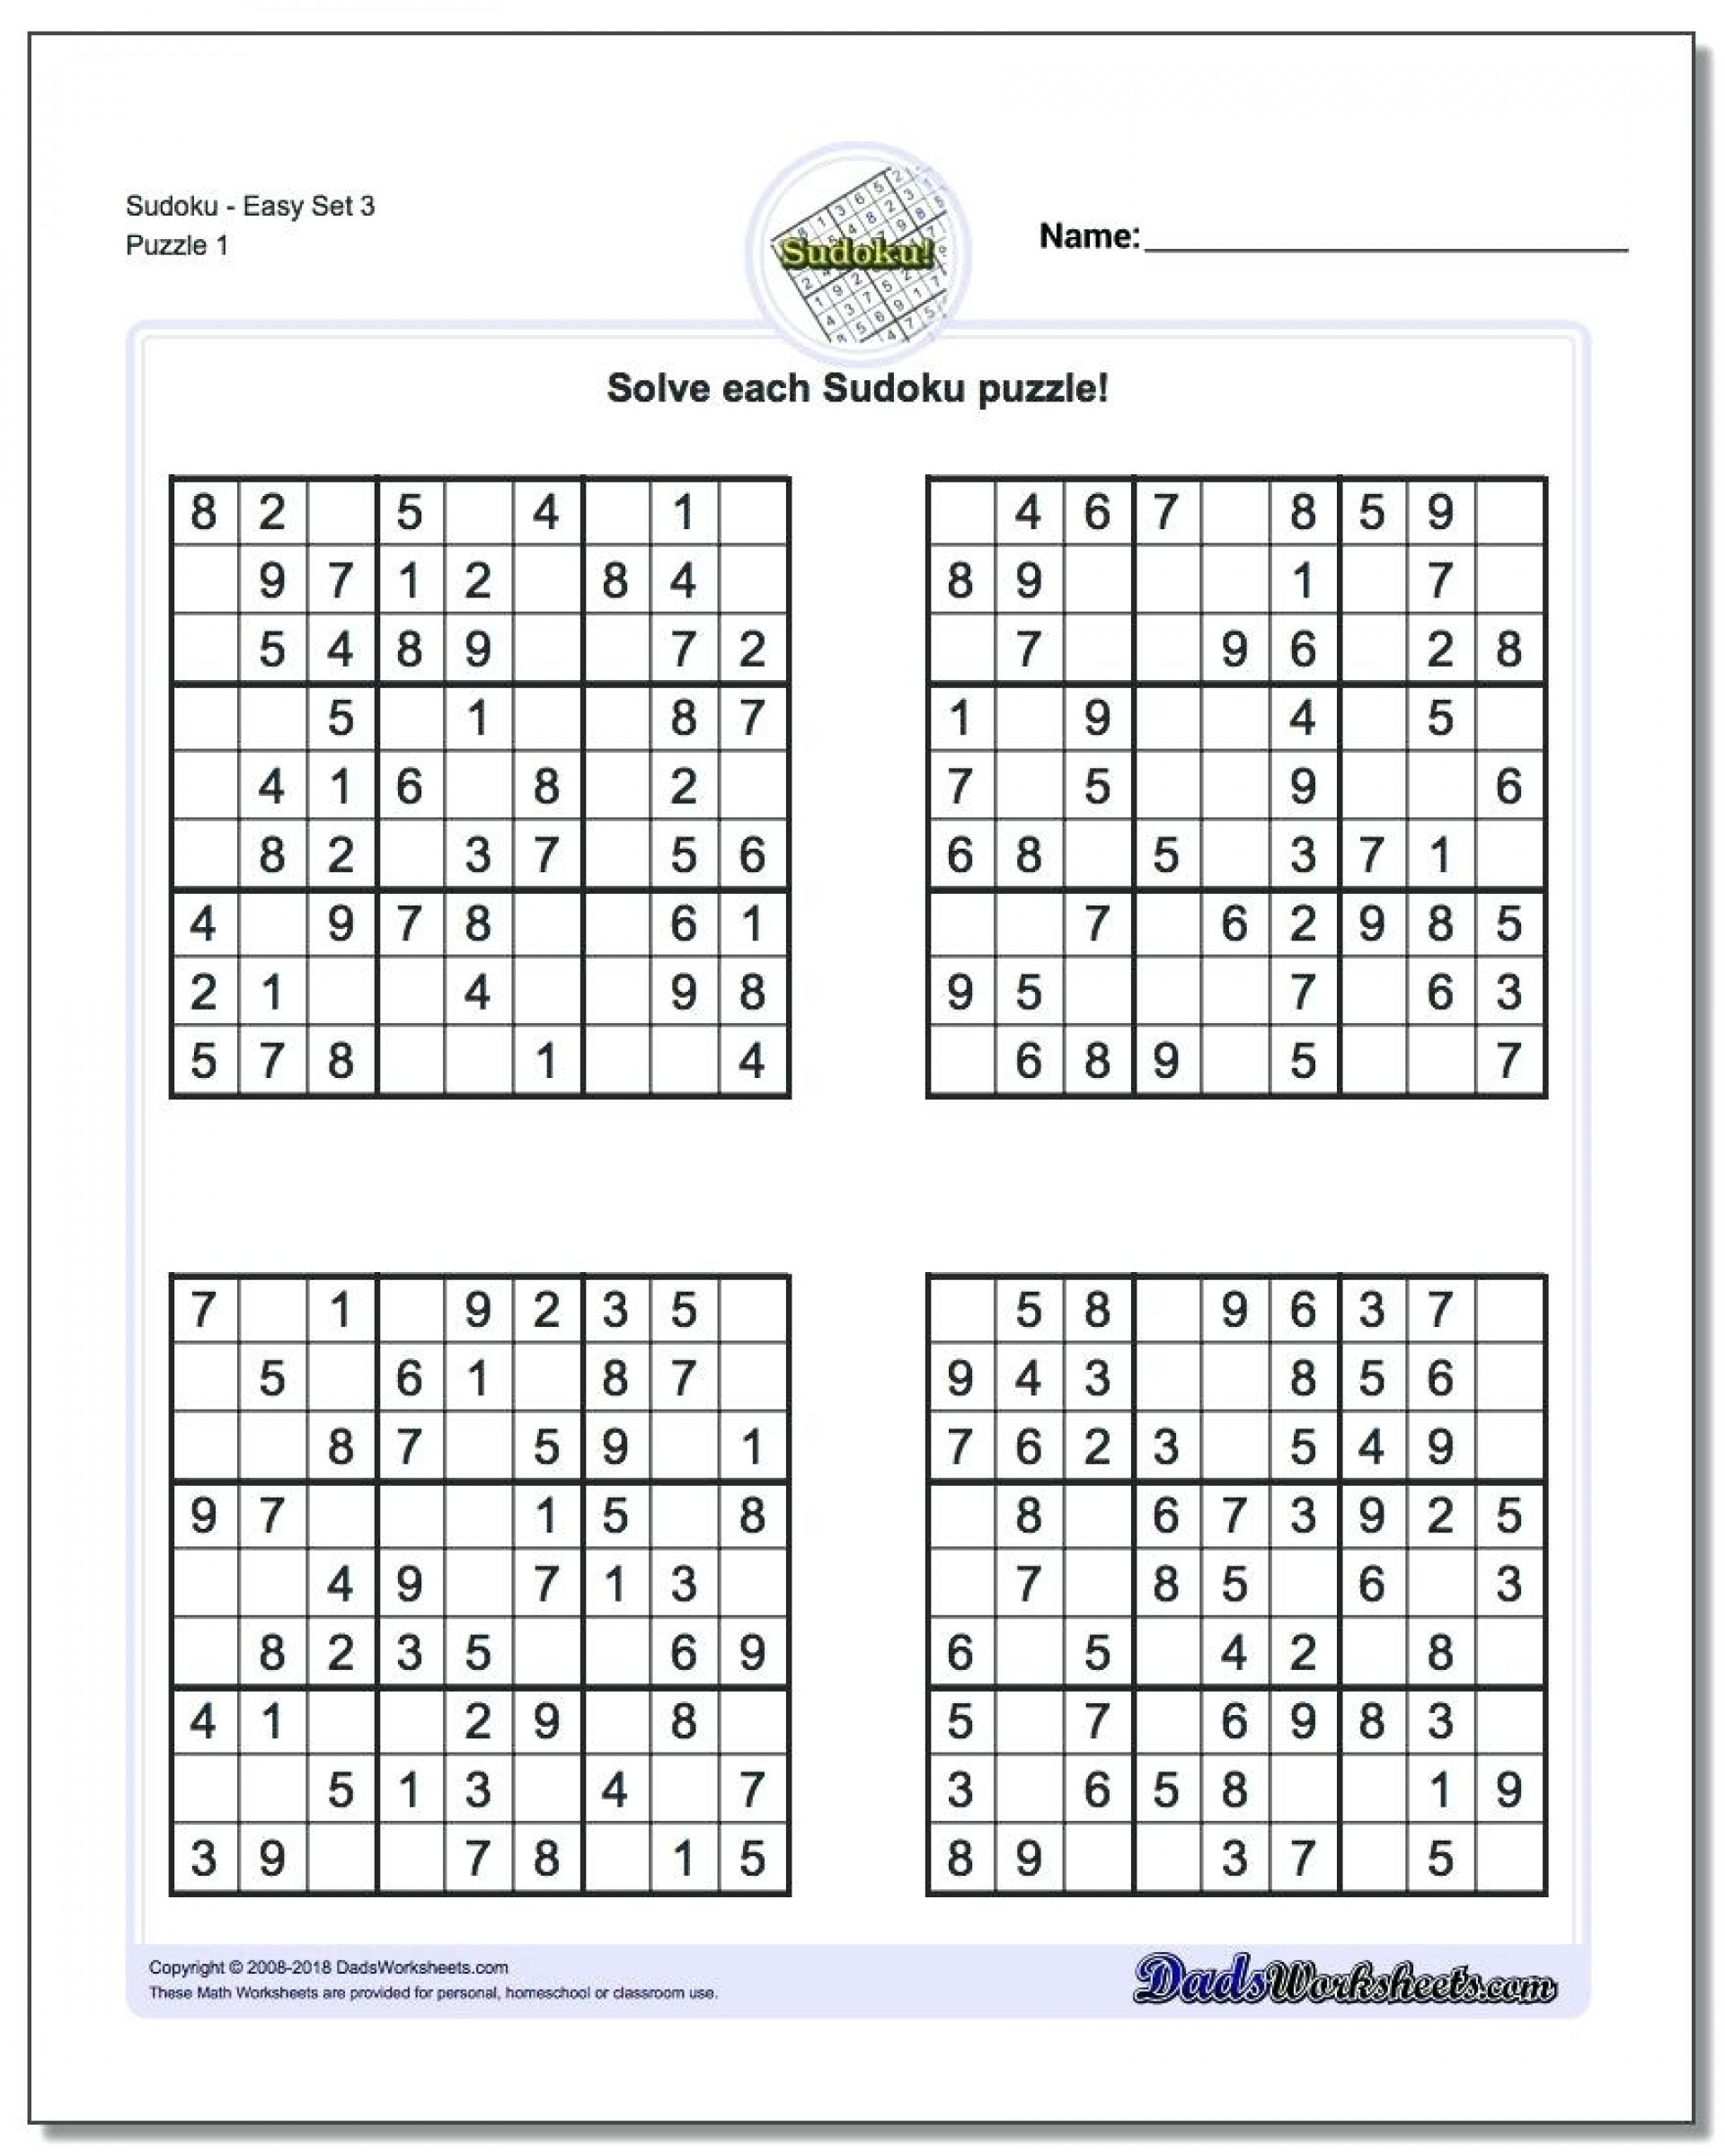 Free Math Worksheets Third Grade 3 Fractions and Decimals Comparing Fractions Like Denominators